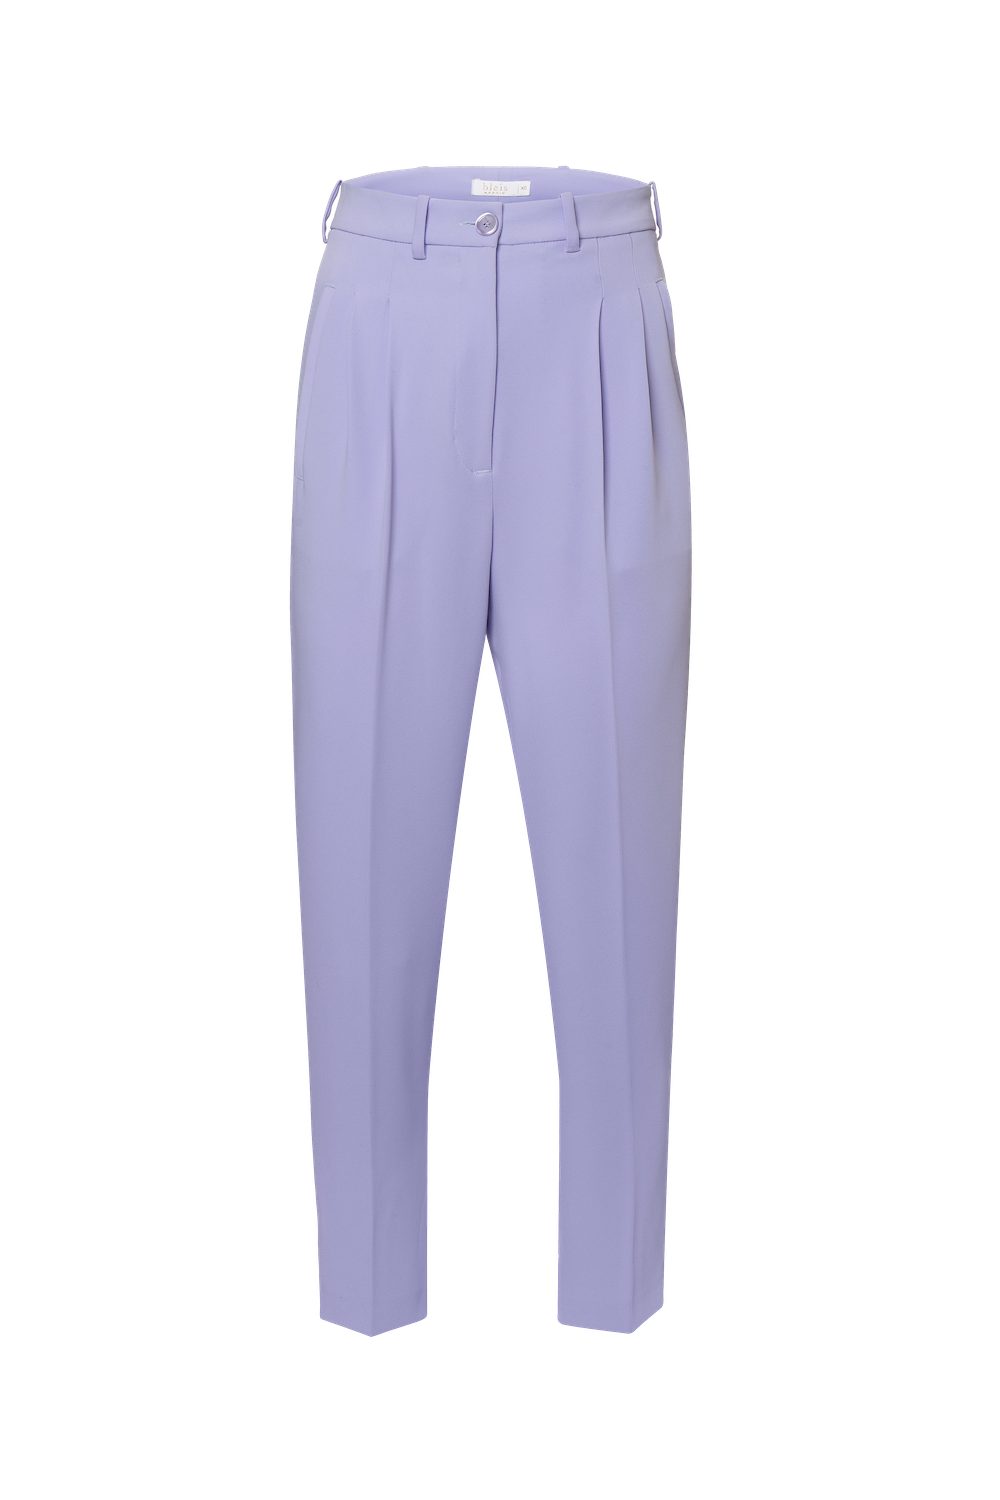 Bleis Crepe Trousers in Lilac — UFO No More